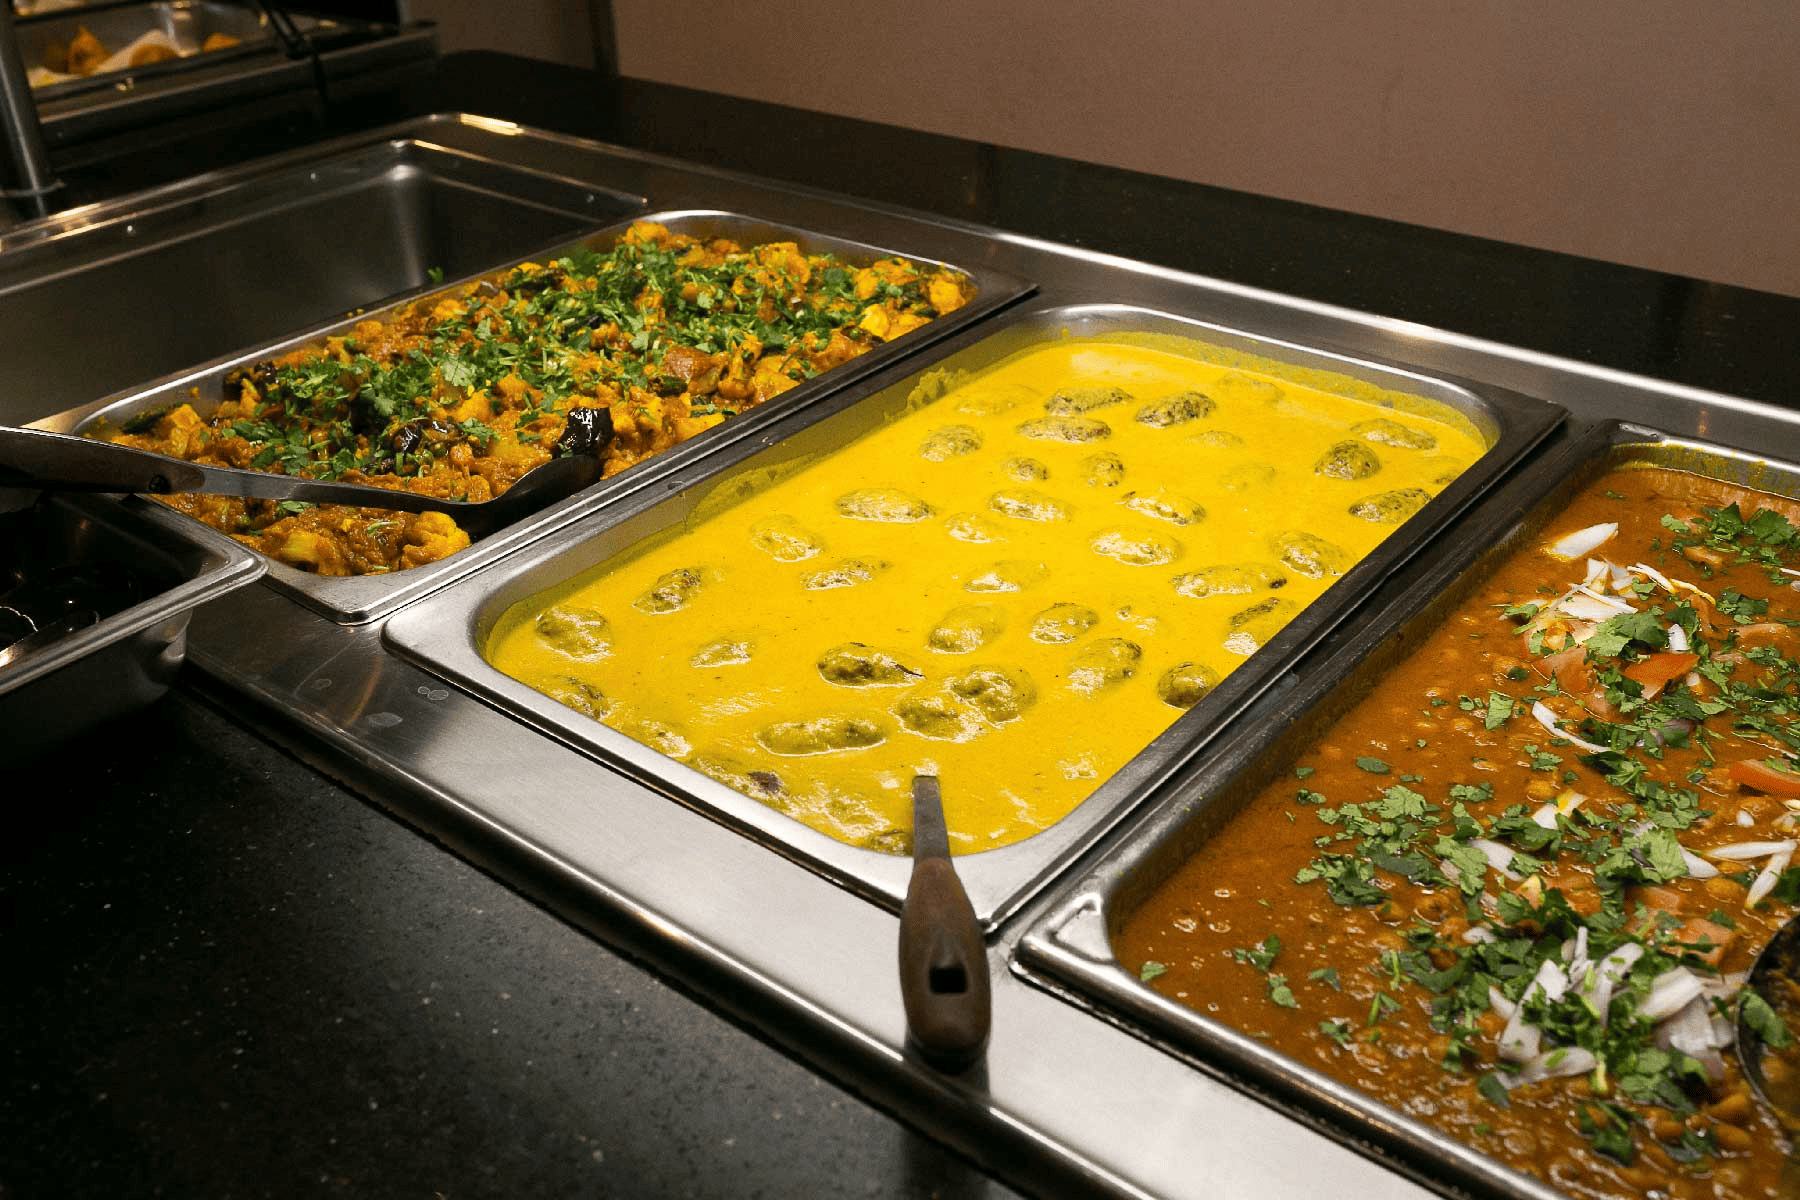 Affordable Indian catering menu with vegetarian dishes and sharing platters